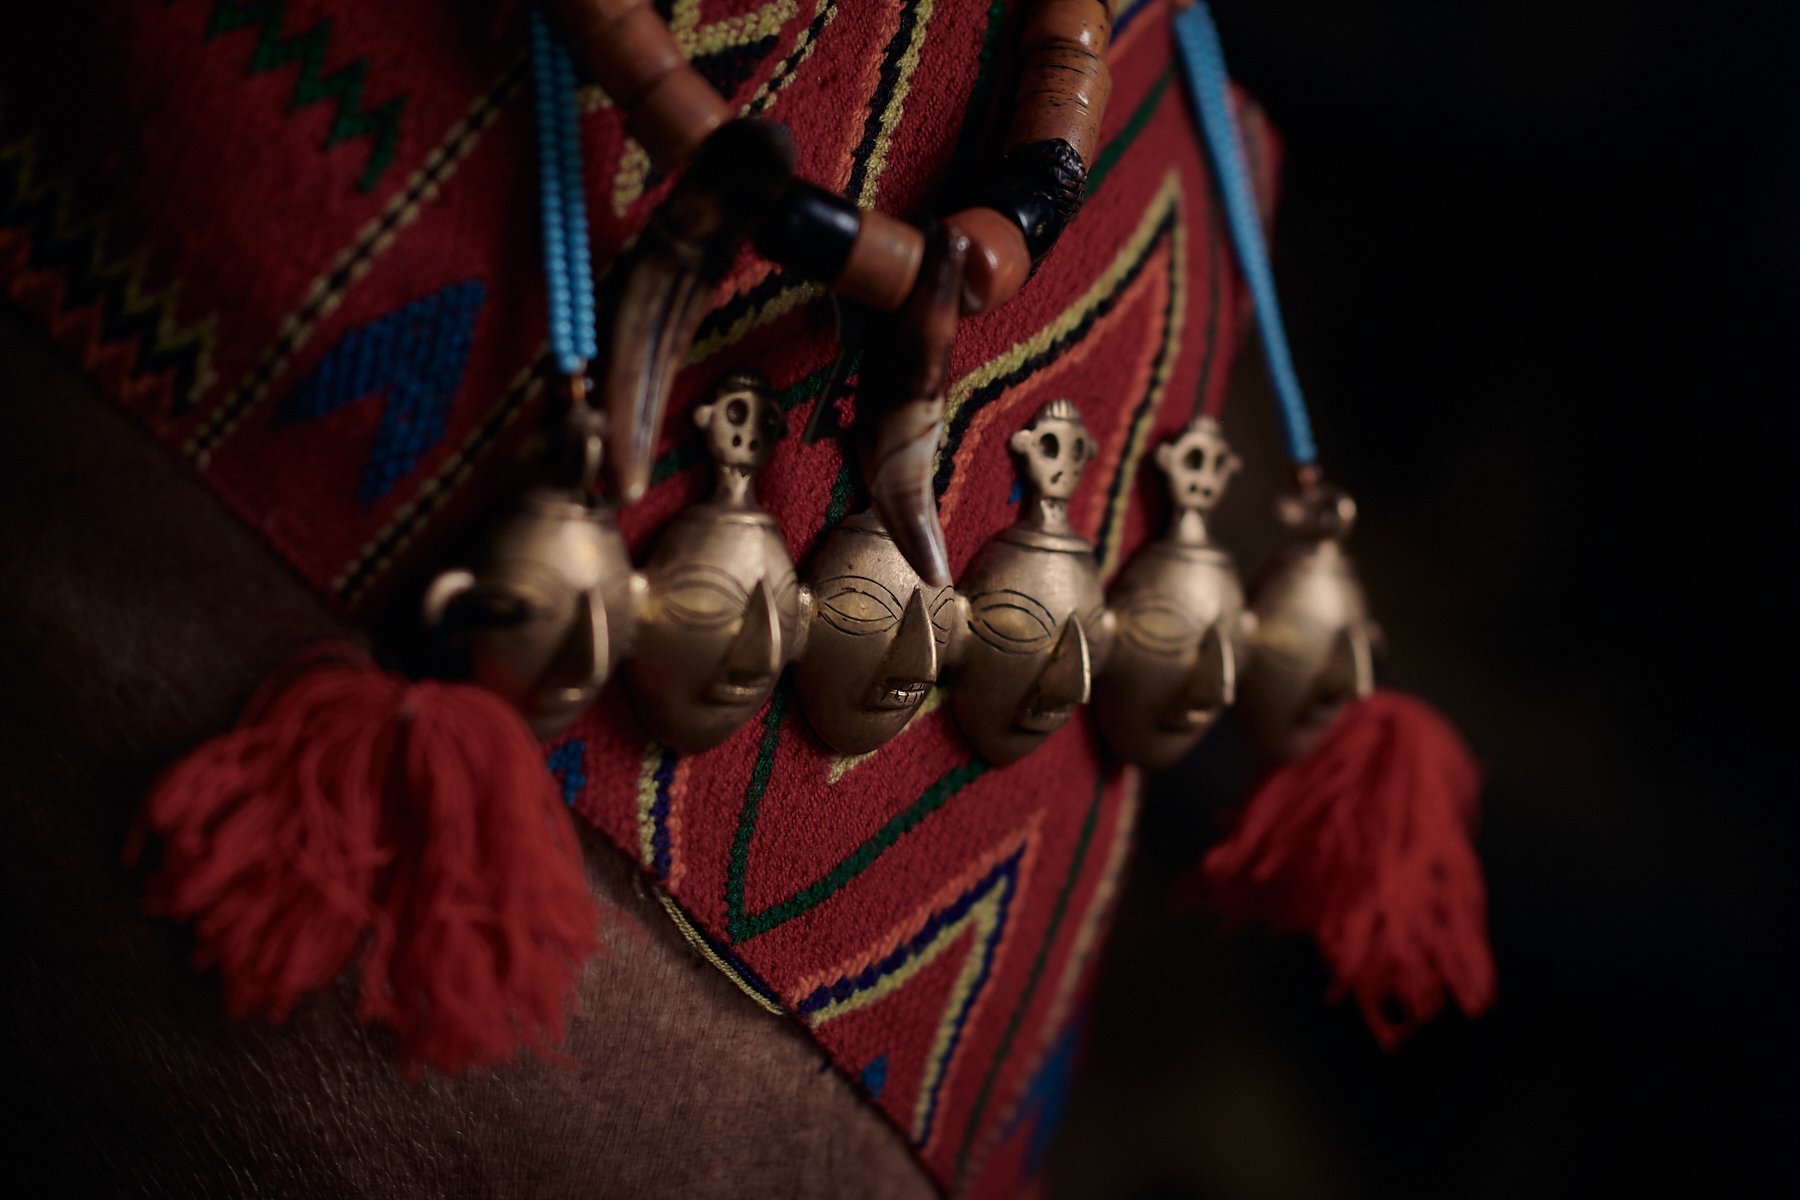 Head necklace, signifying how many heads the headhunter has claimed, Nagaland